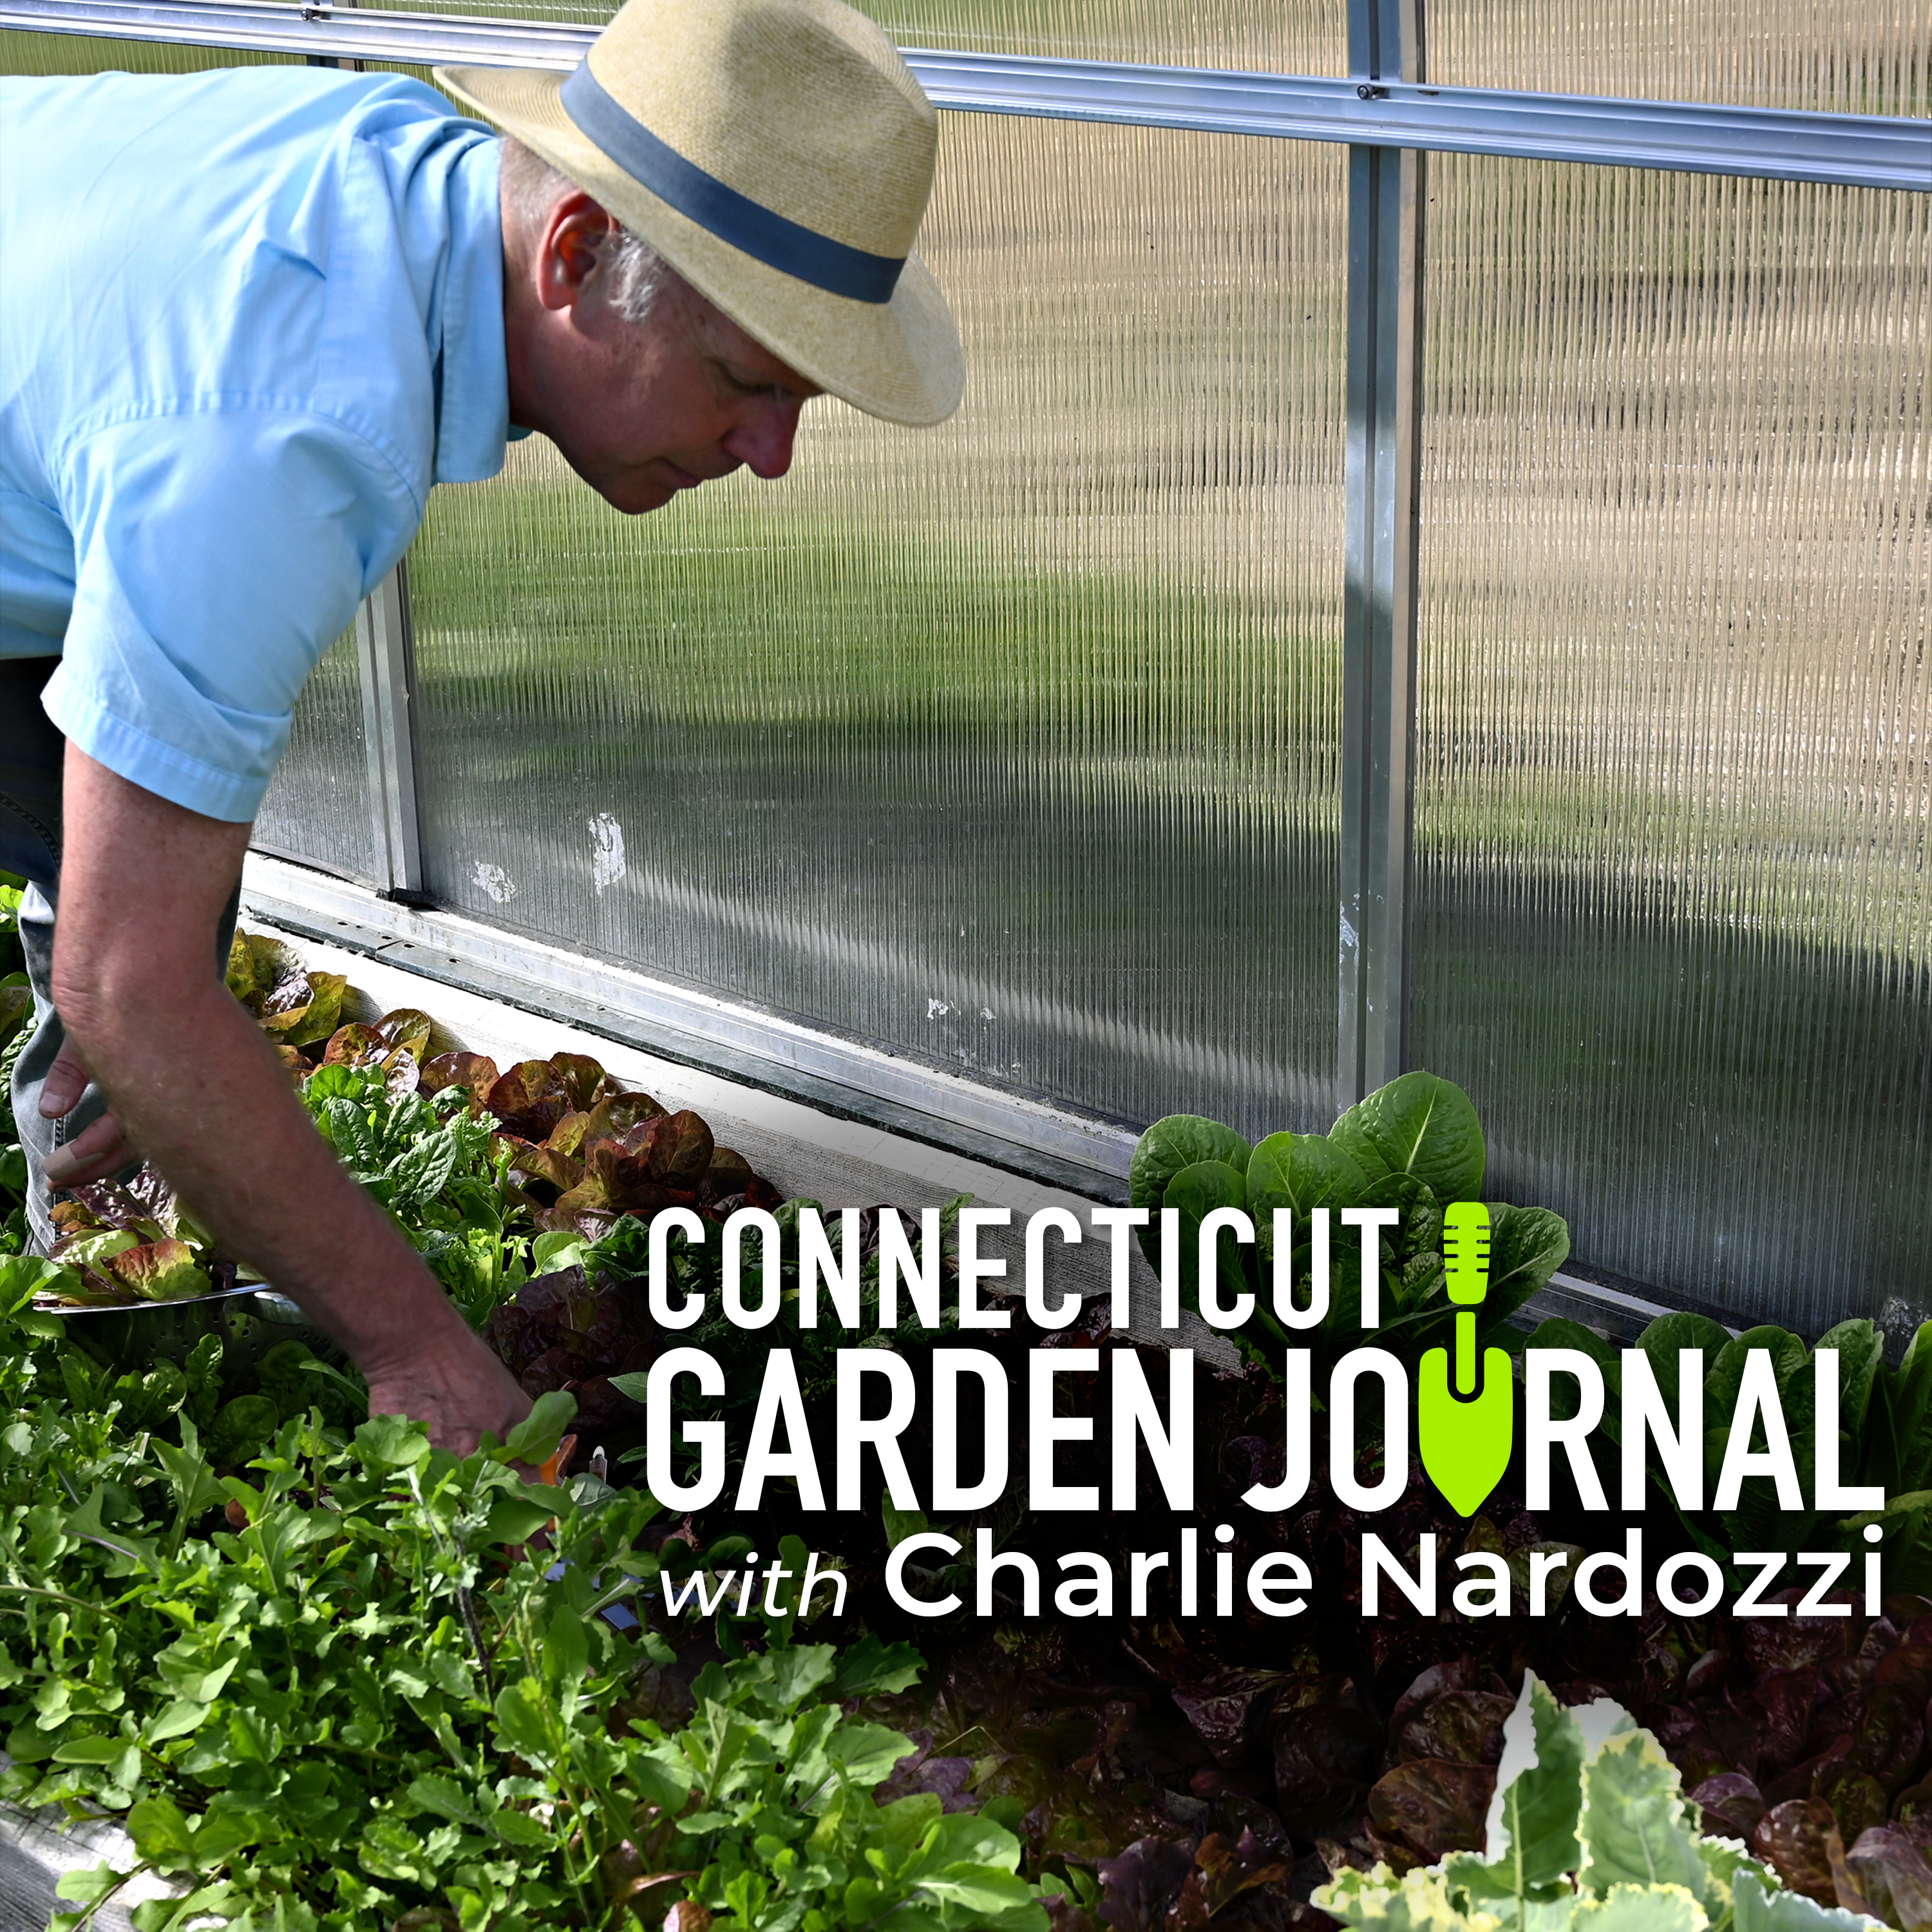 Connecticut Garden Journal: For the freshest peas, grow your own